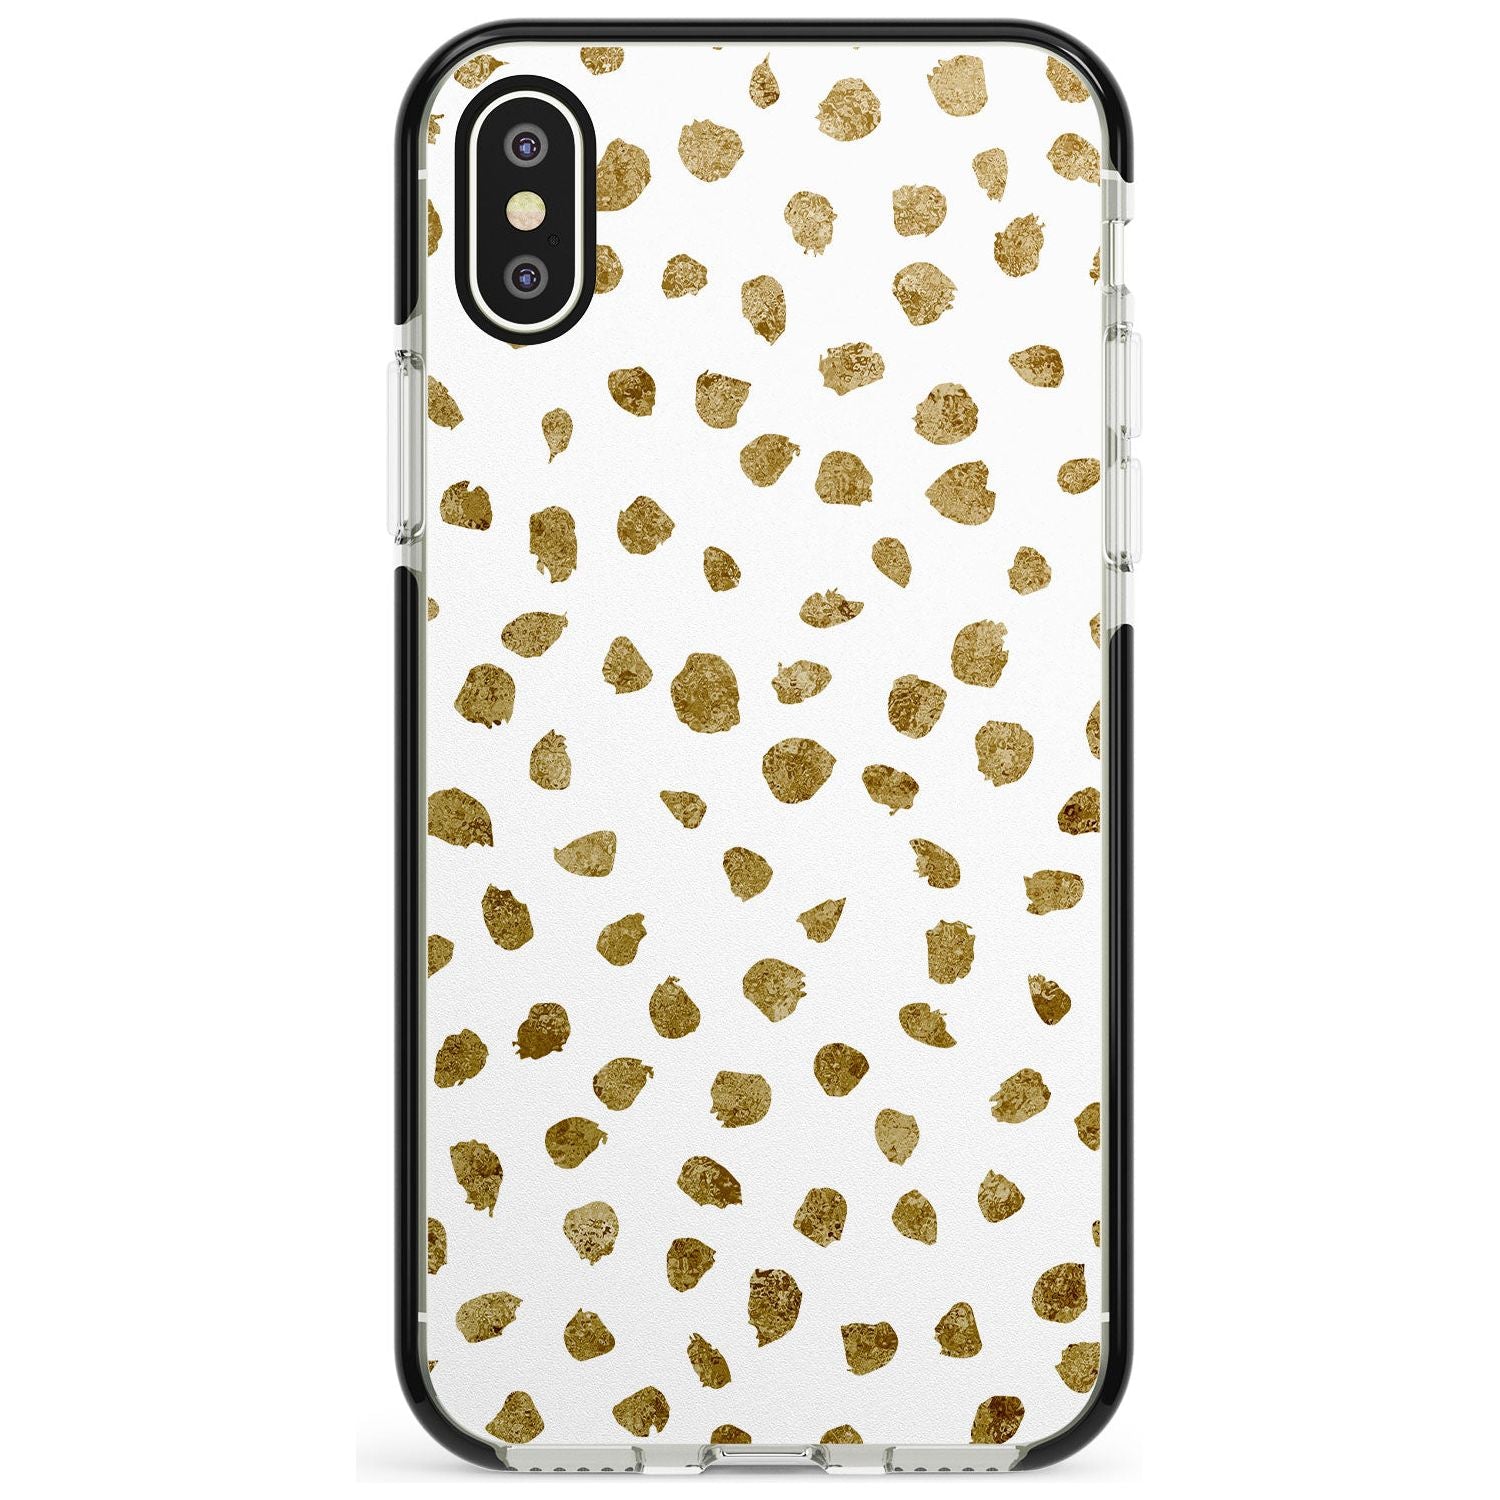 Gold Look on White Dalmatian Polka Dot Spots Black Impact Phone Case for iPhone X XS Max XR